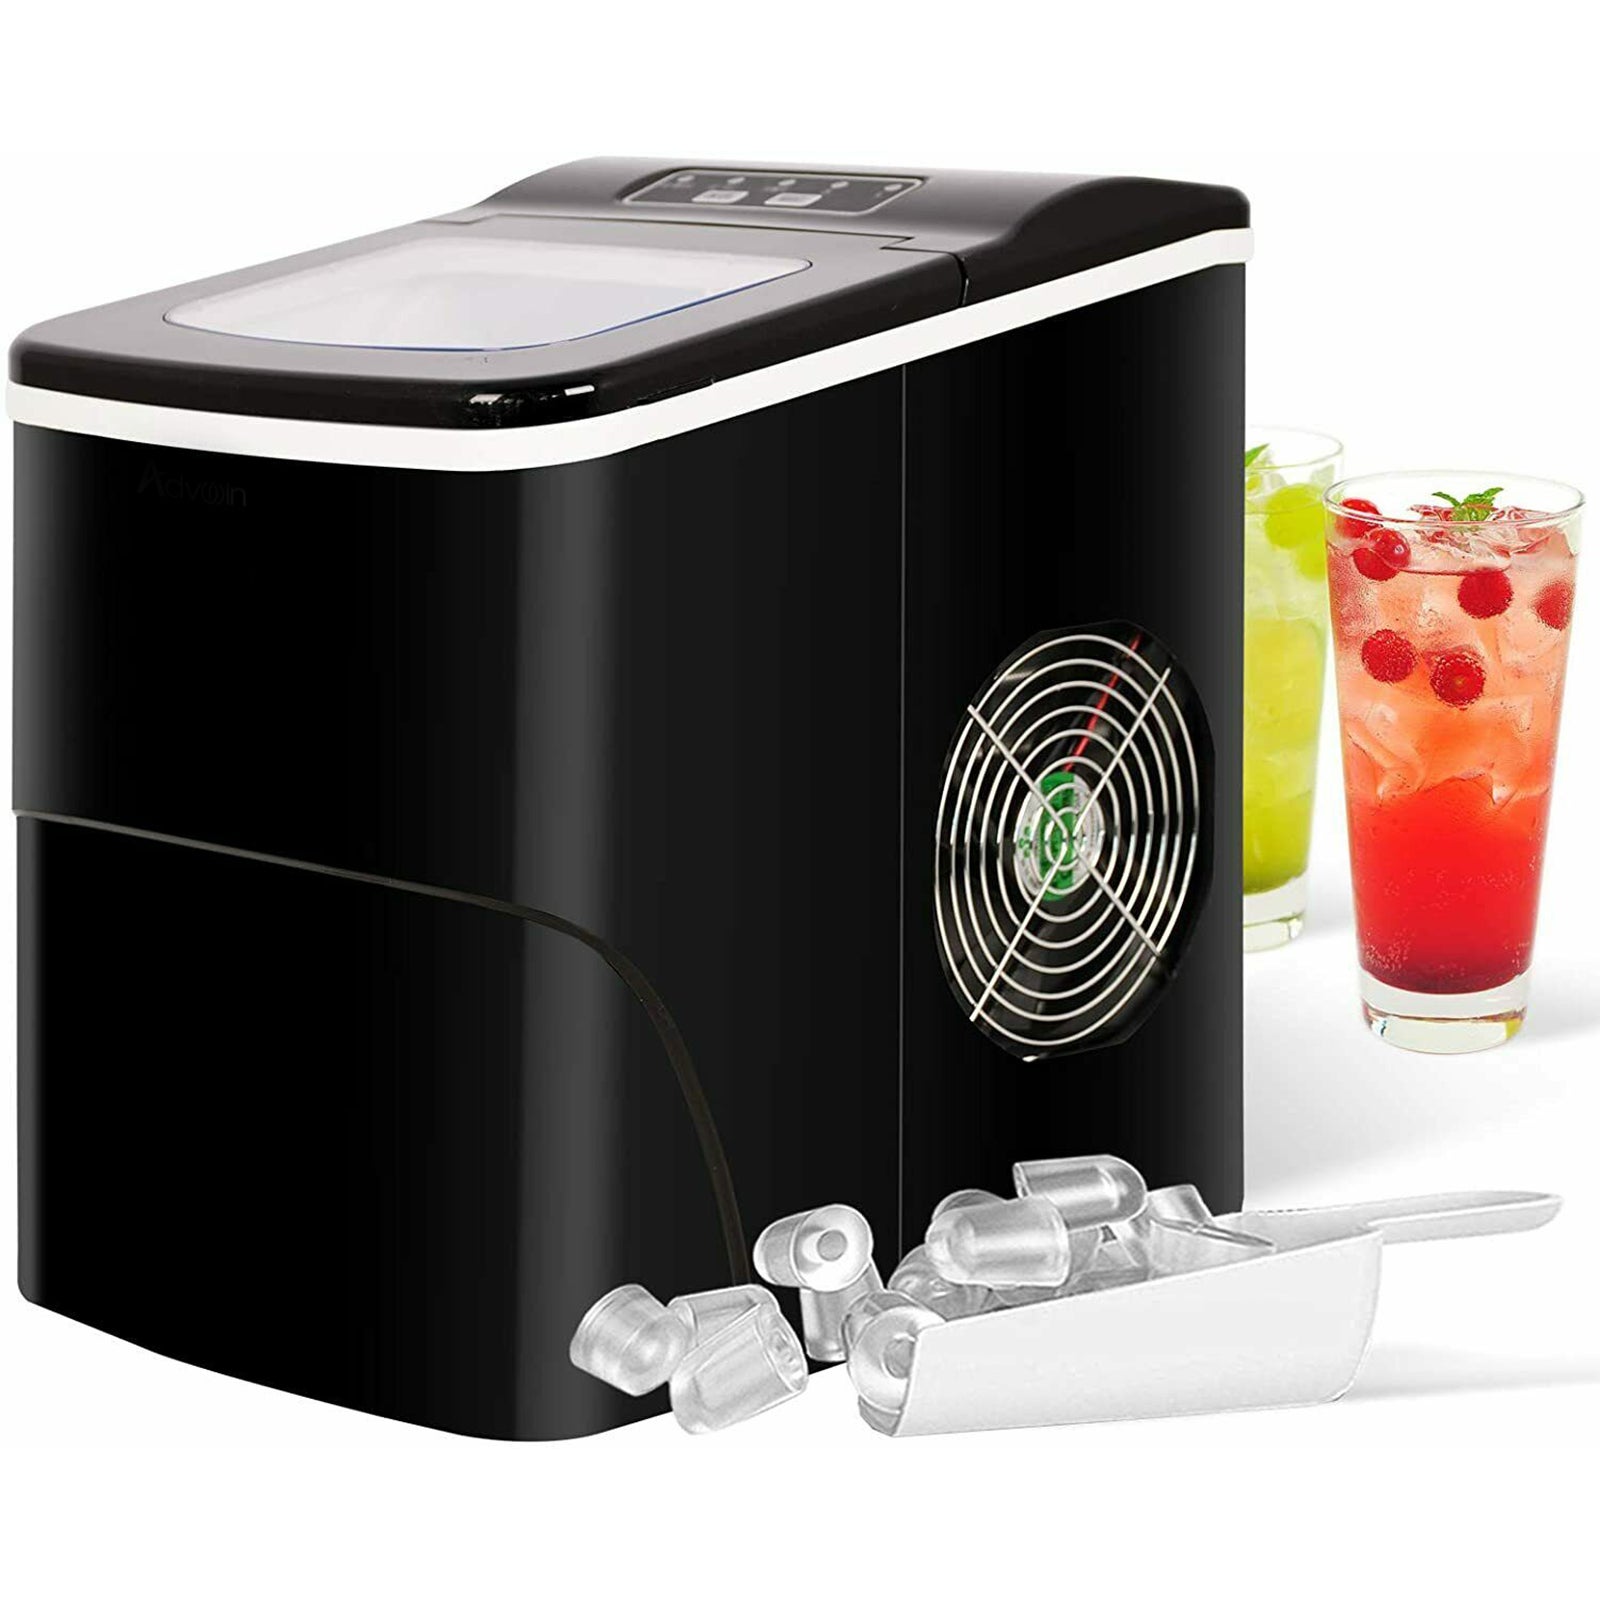 Advwin 2.2L Ice Cube Maker Machine Portable Countertop Fast Commercial Home Bar Black